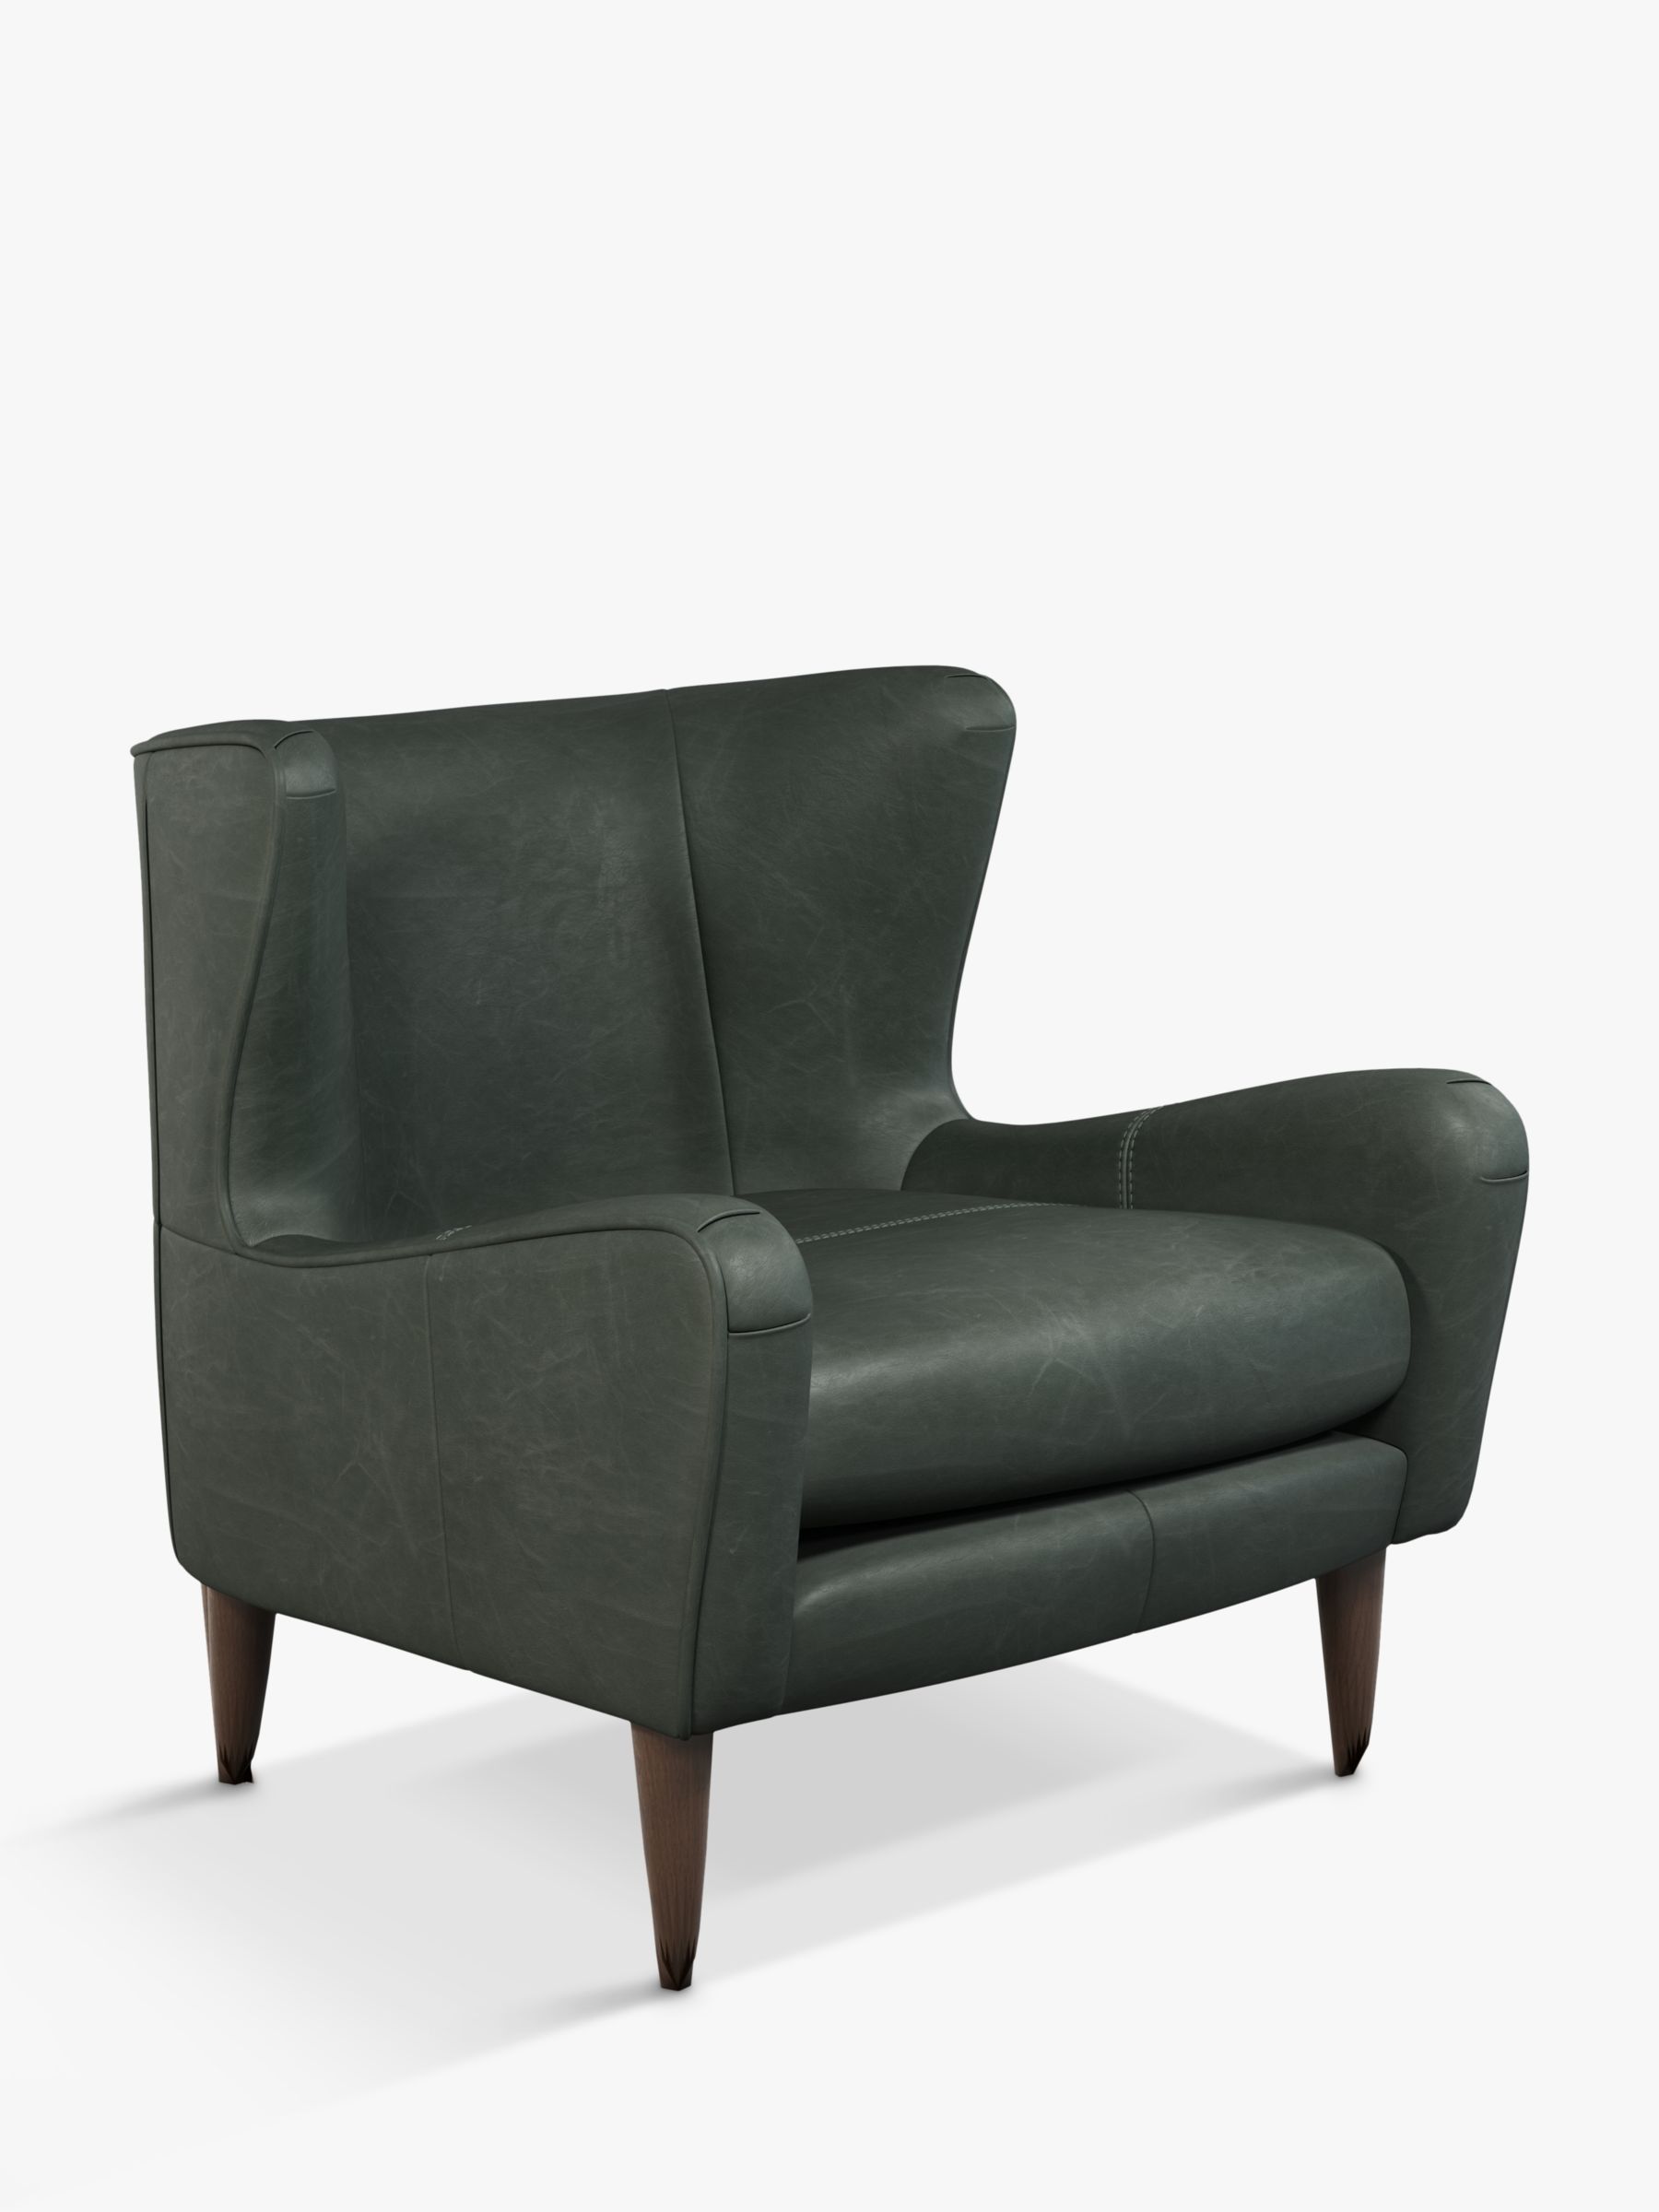 Photo of John lewis + swoon keats leather wingback armchair